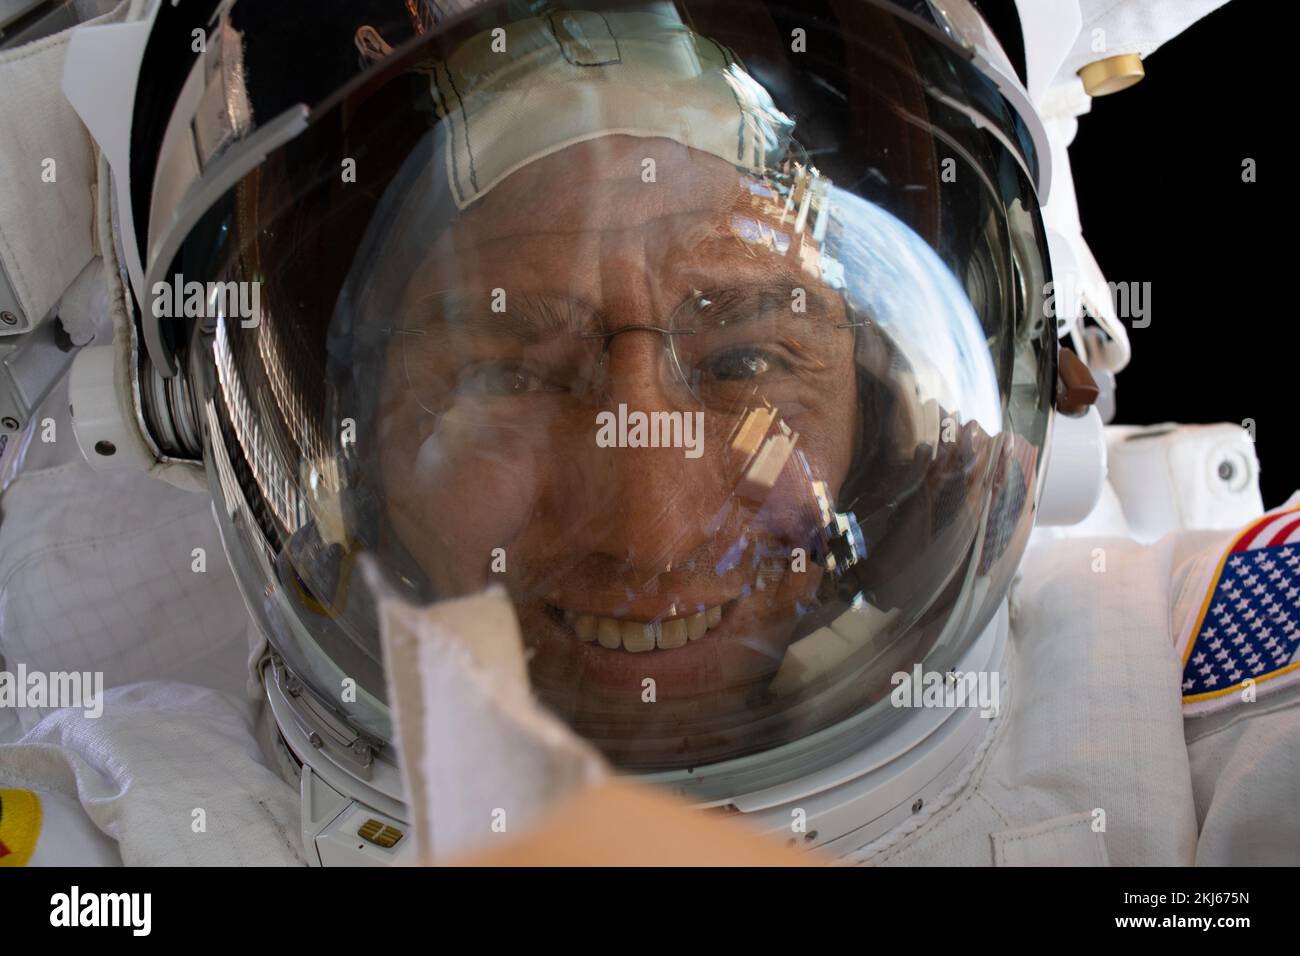 International Space Station, Earth Orbit. 15 November, 2022. NASA astronaut and Expedition 68 Flight Engineer Frank Rubio takes a selfie during a spacewalk outside the International Space Station, November 15, 2022 in Earth Orbit. The 7 hours and 11 minute spacewalk to assemble a mounting bracket was the first for Rubio and fellow astronaut Josh Cassada.  Credit: Frank Rubio/NASA/Alamy Live News Stock Photo